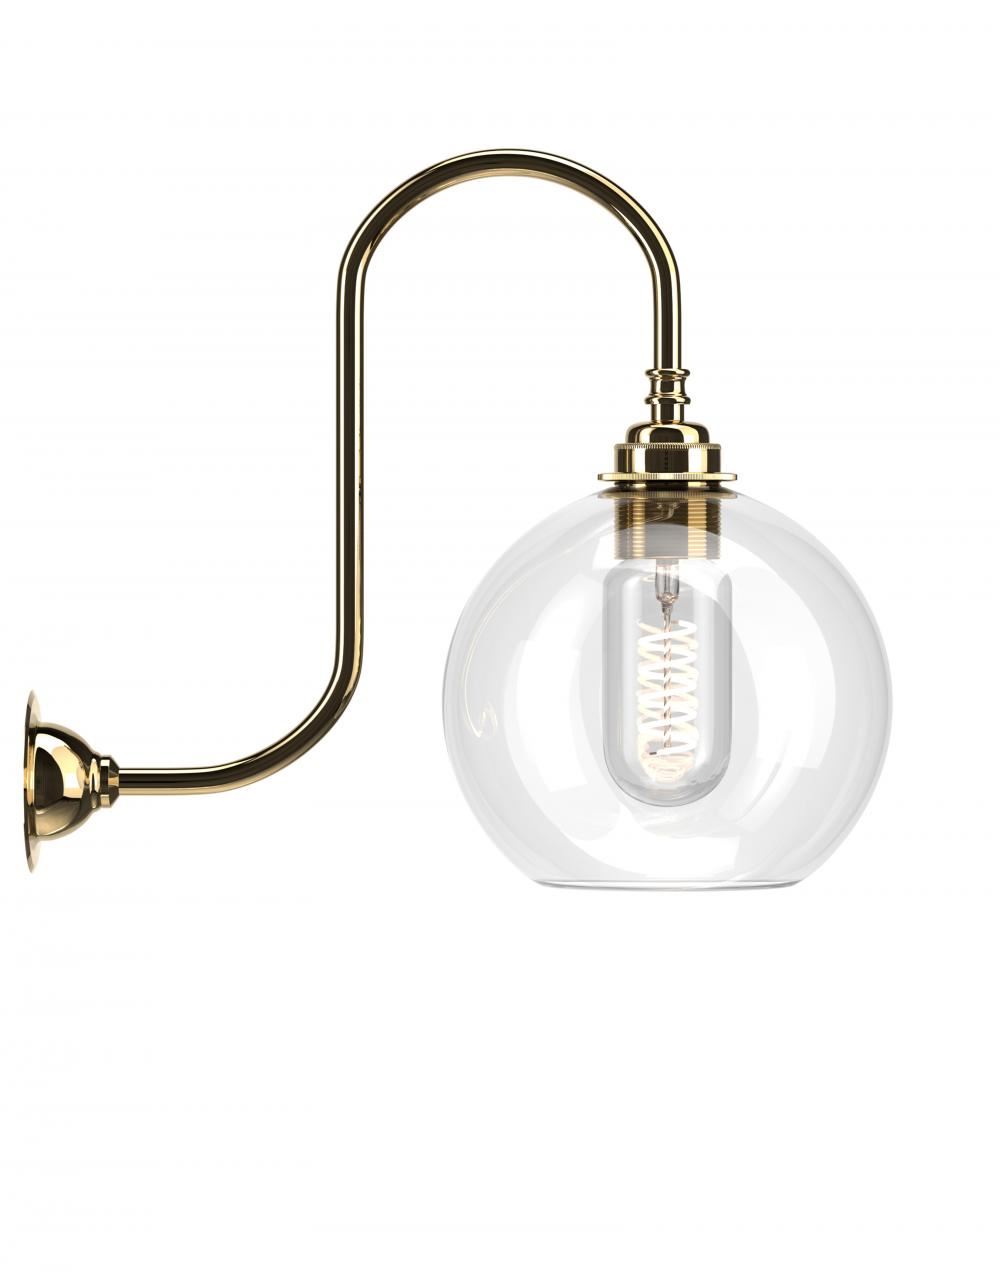 Hereford Swan Neck Wall Light Medium Clear Polished Brass